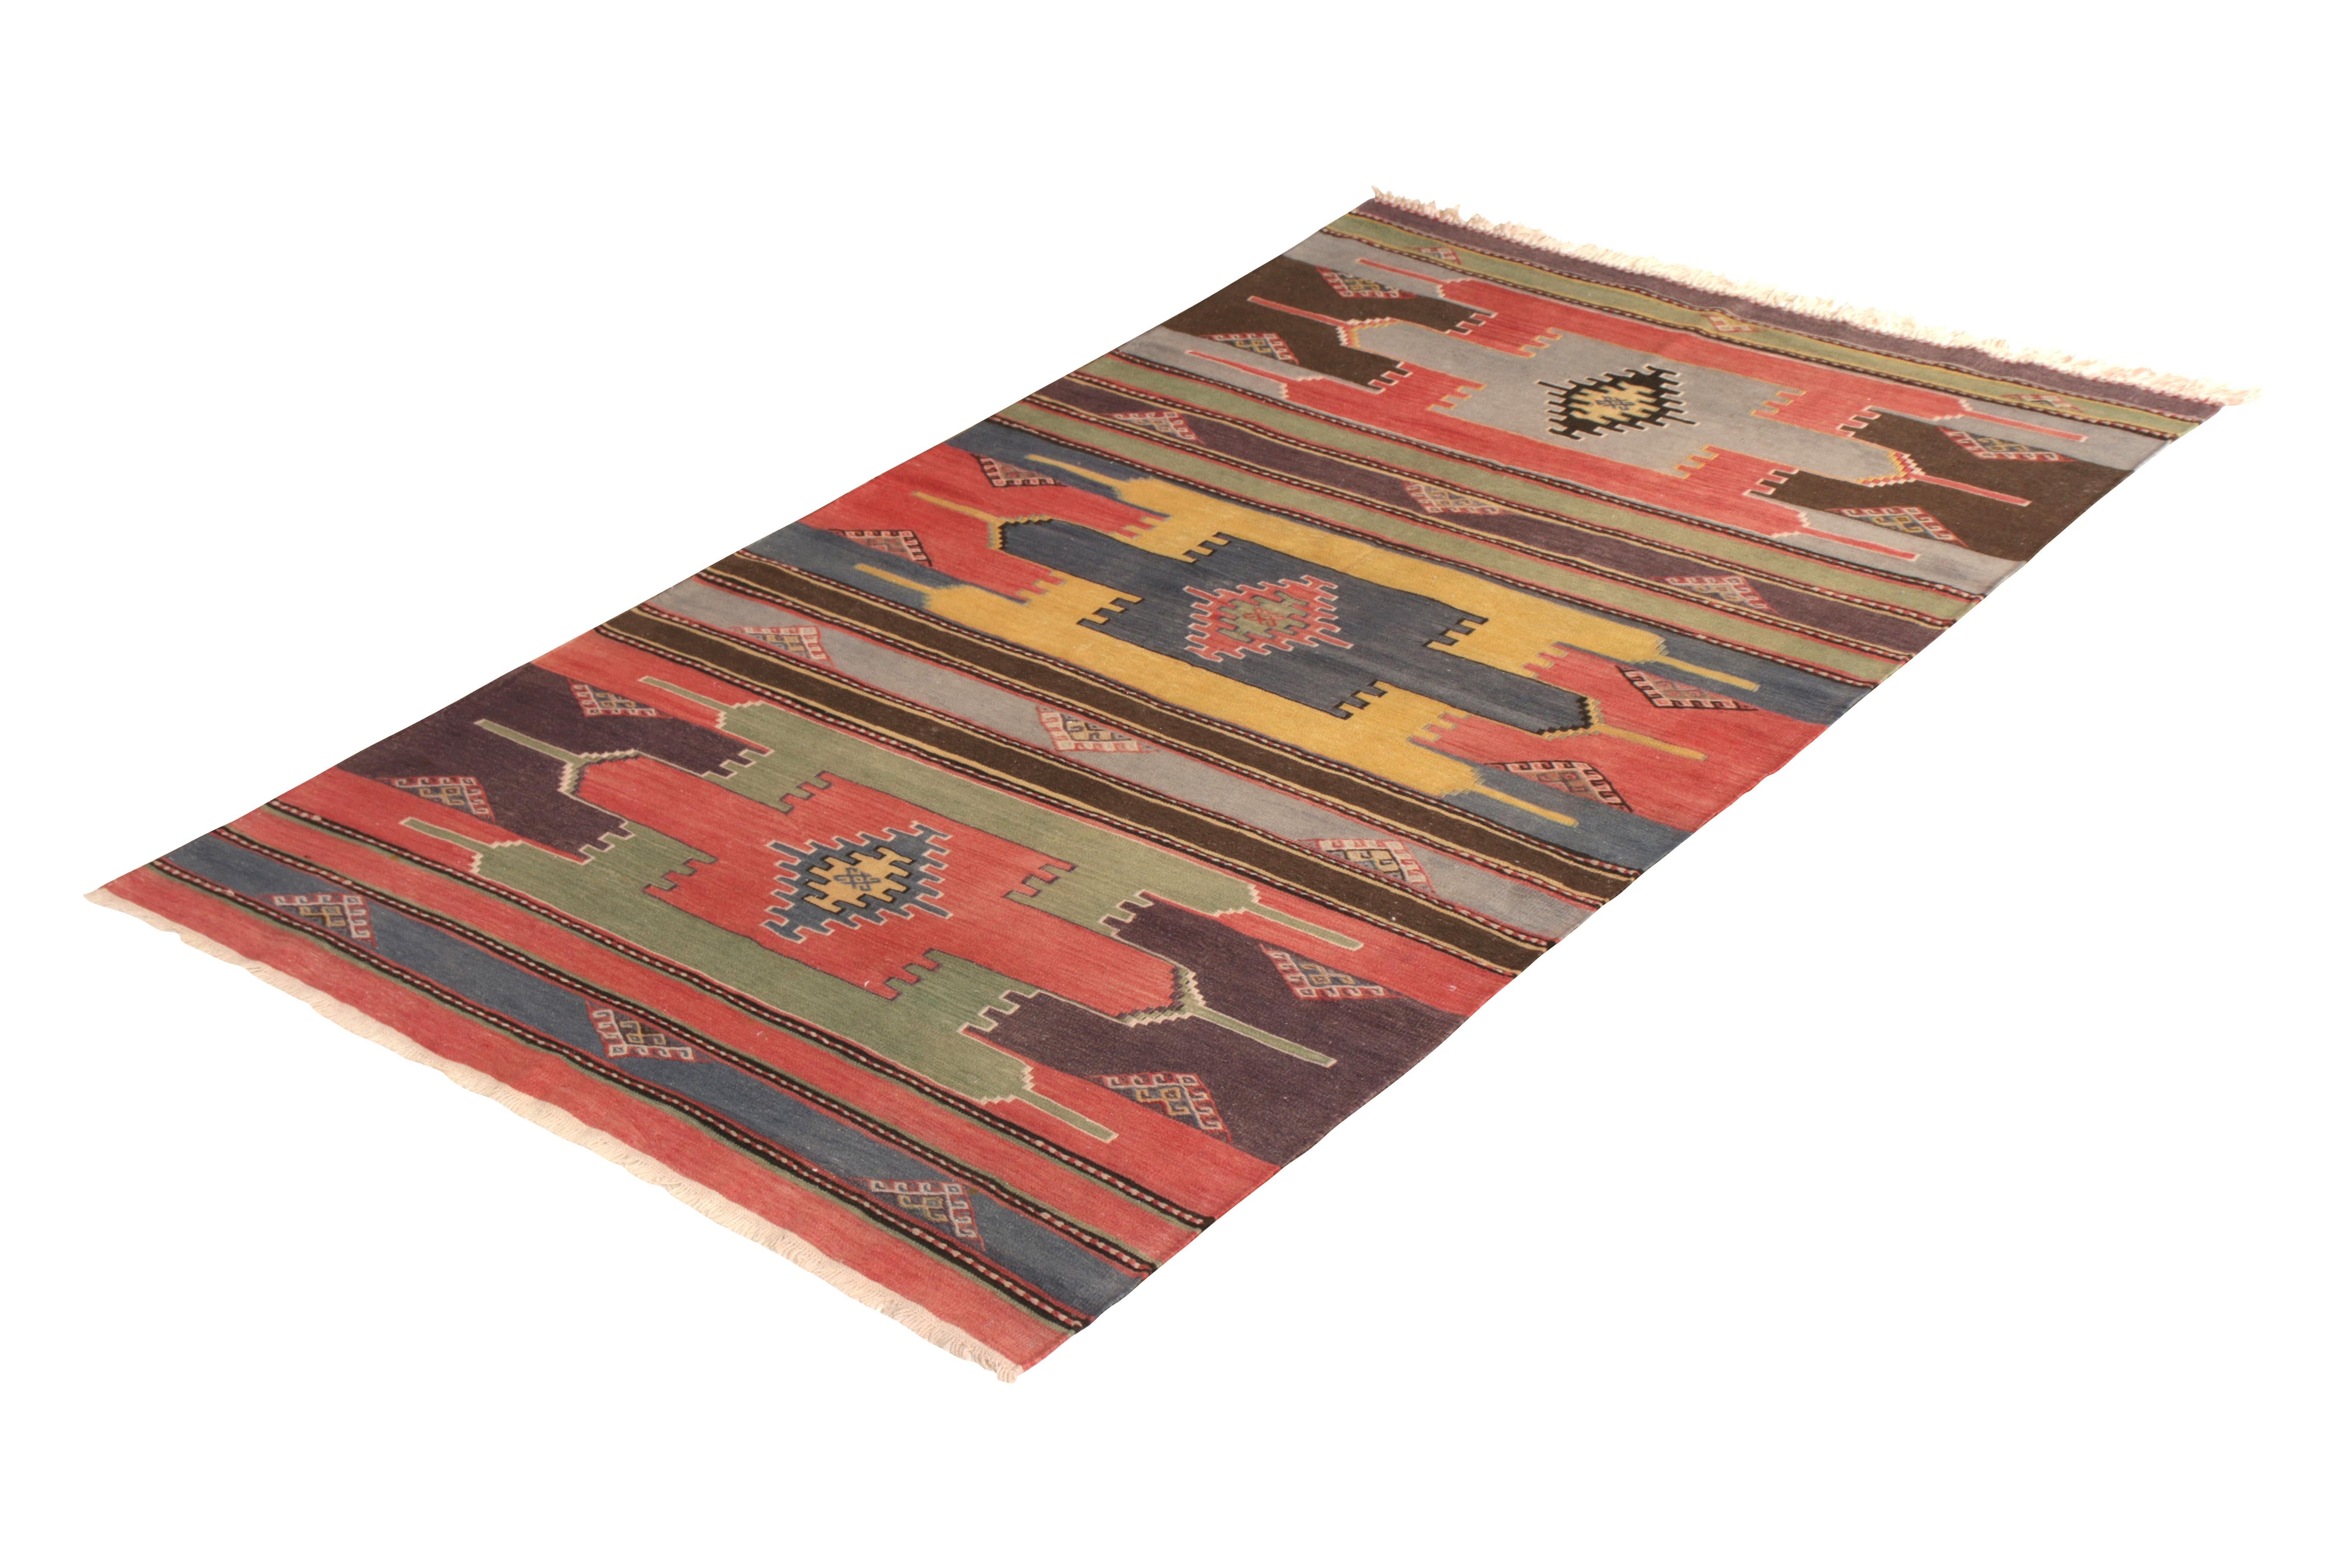 Handmade in flat-woven wool originating from Turkey circa 1950-160, this midcentury rug is a vintage Kilim of notable tribal nature, employing both an arresting geometric all-over pattern and a series of exciting blue, red, green, and yellow